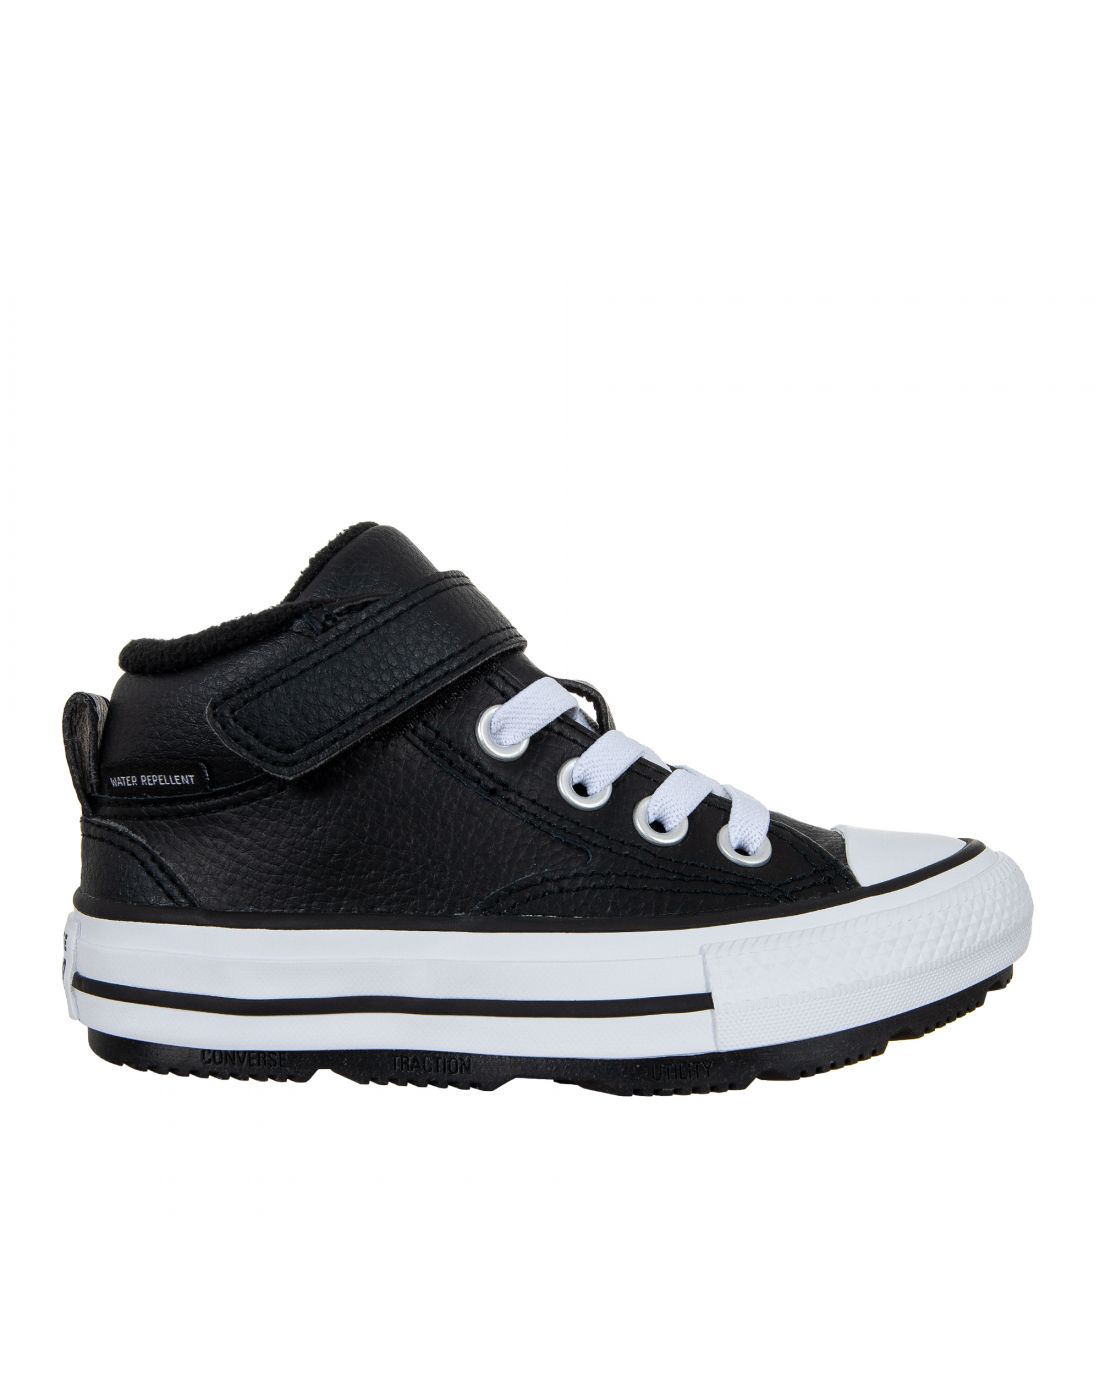 All Star Sneakers Shoes, Converse, 23270397 | LapinKids.com | LAPIN KIDS